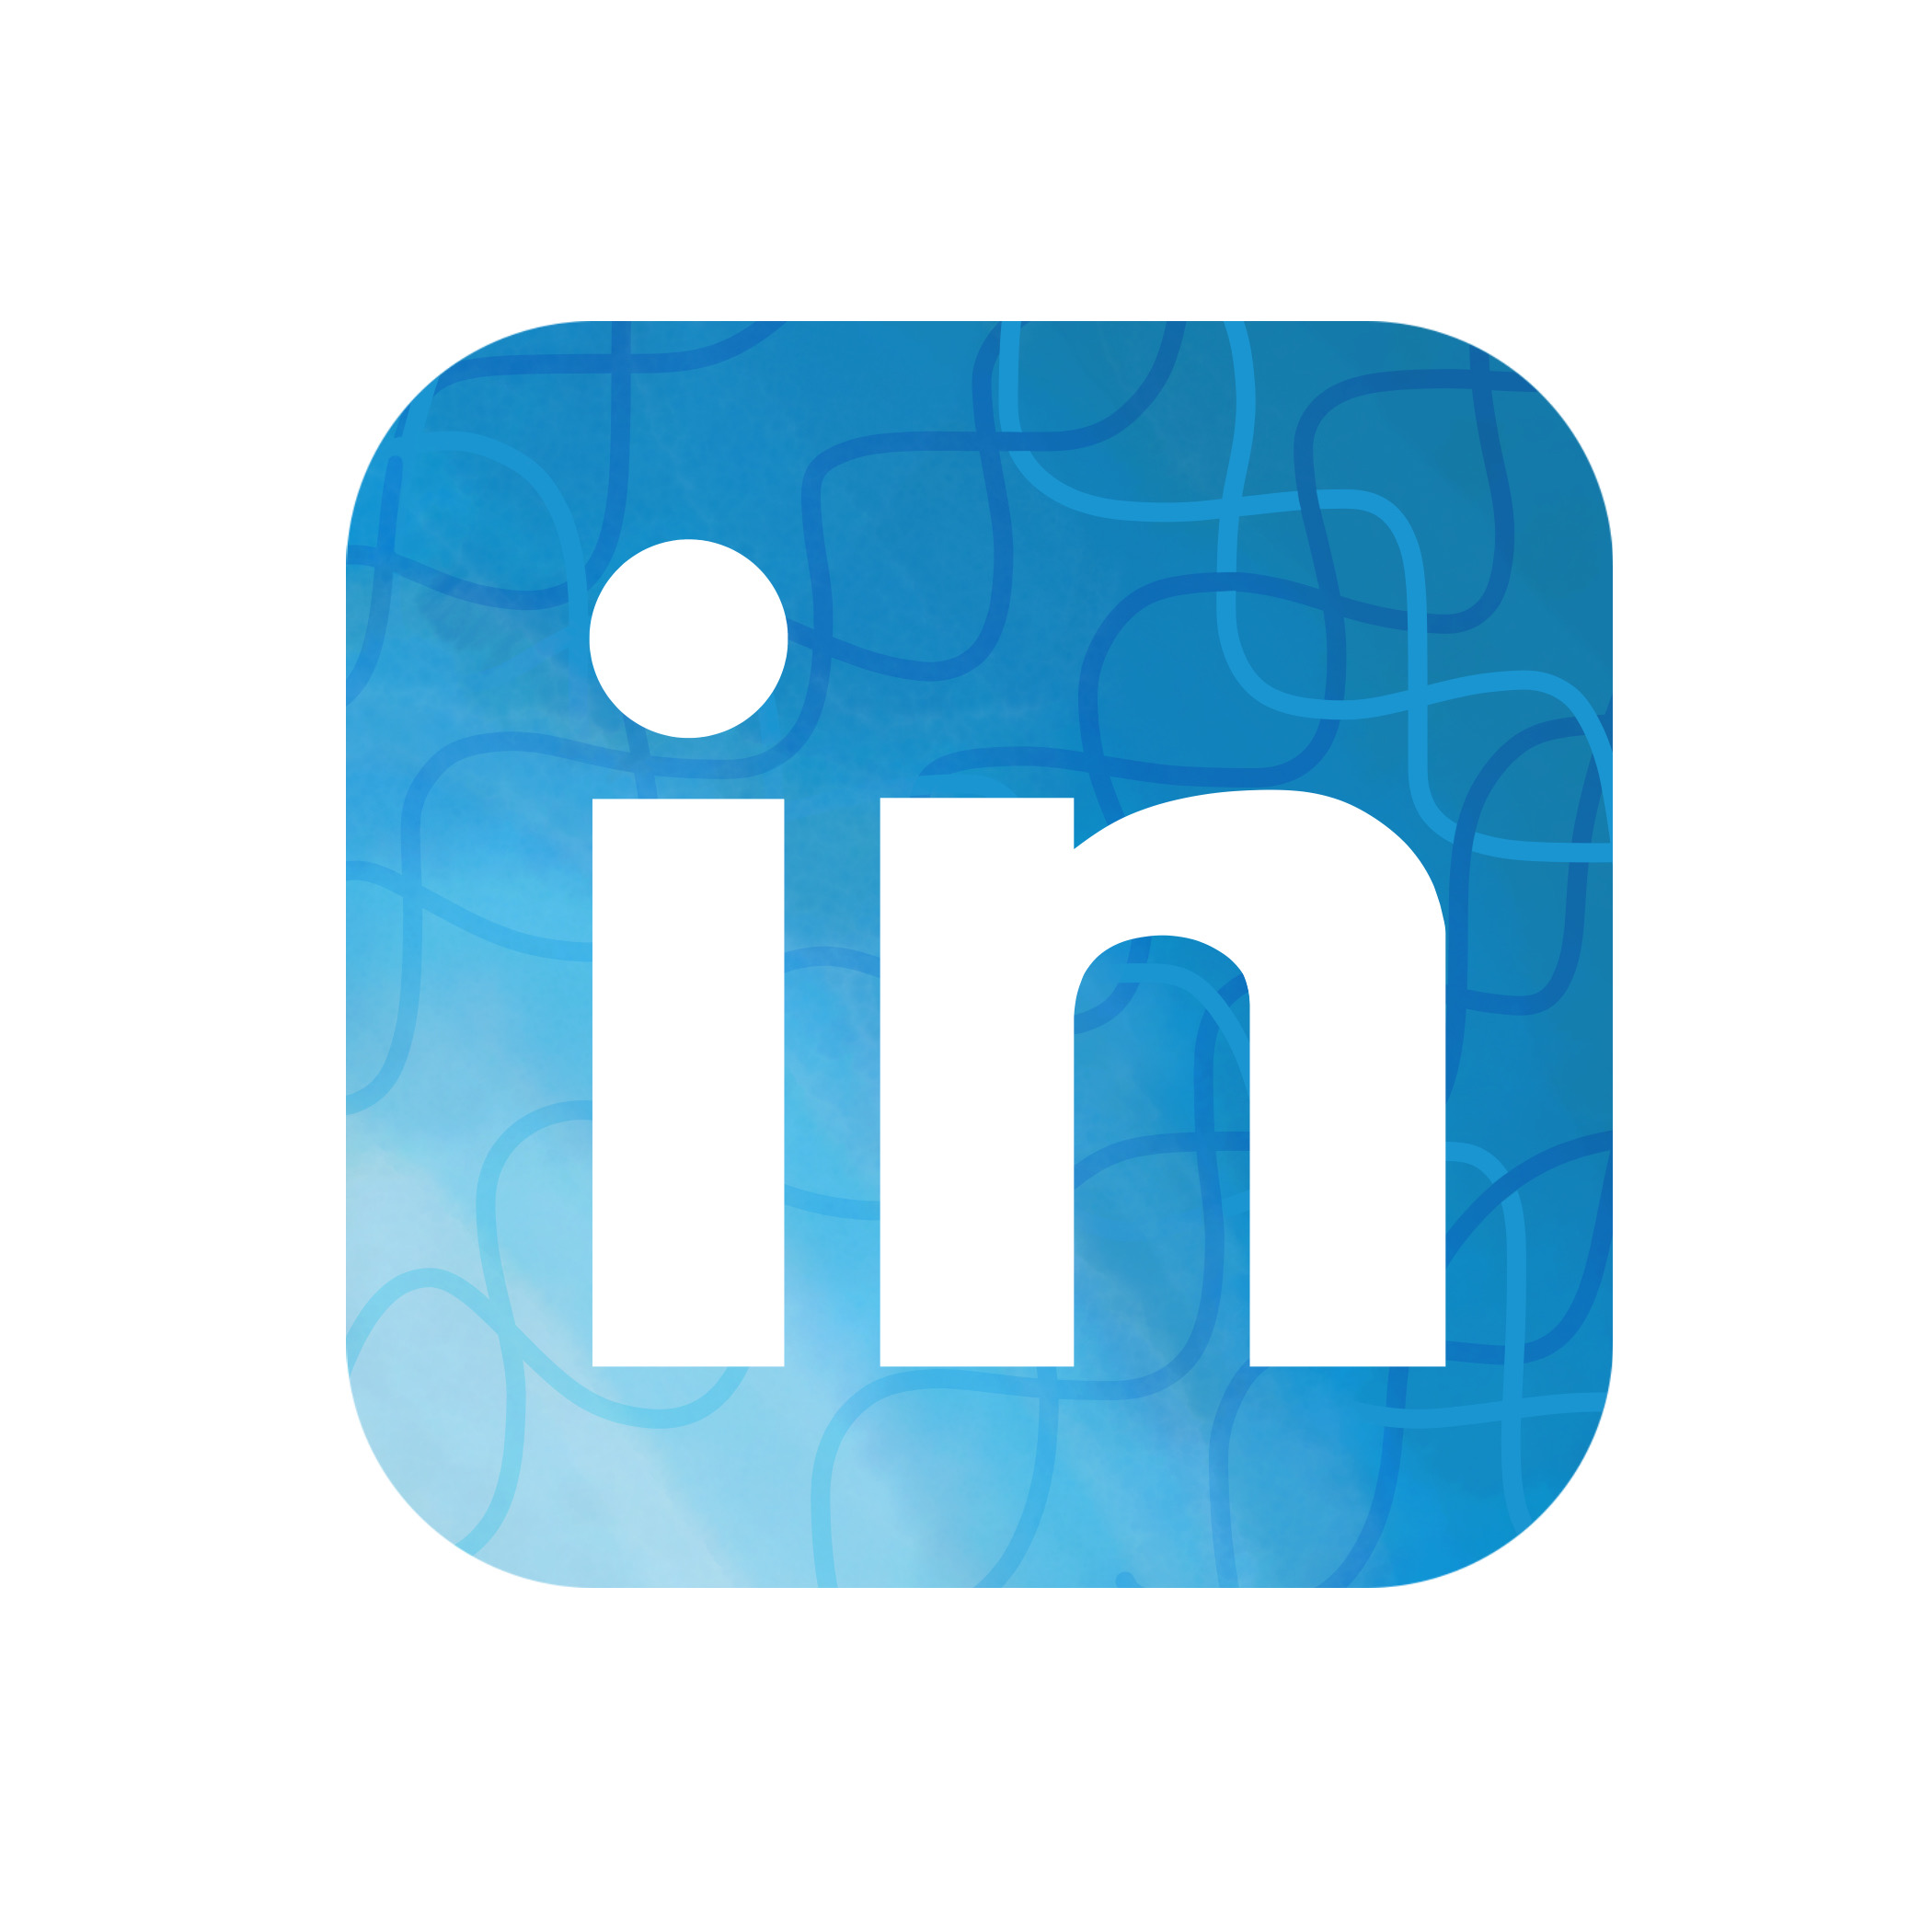 Digital watercolor LinkedIn icon by Leah. Click to connect professionally.